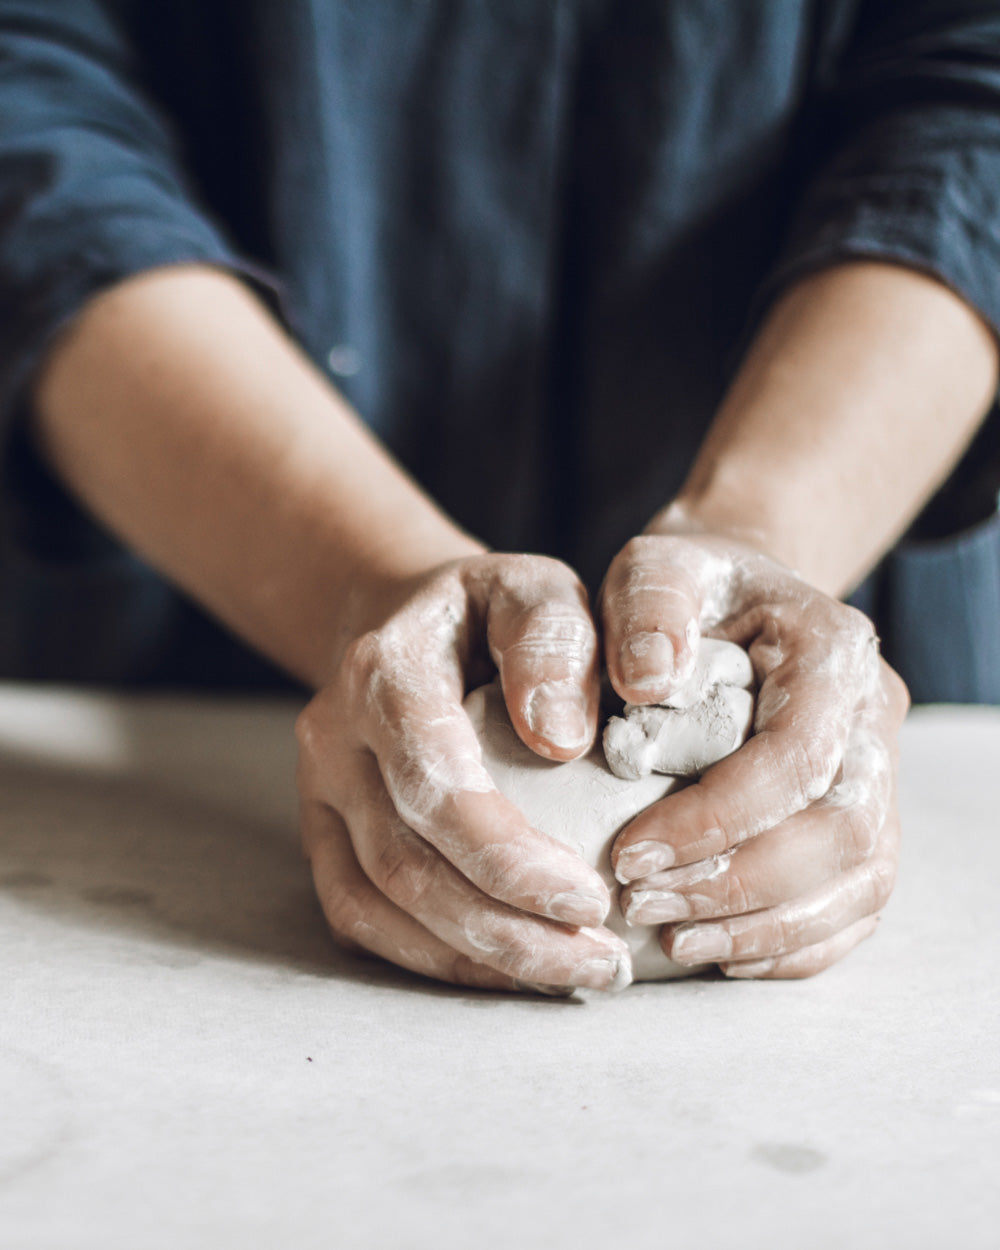 3 things pottery taught me about life